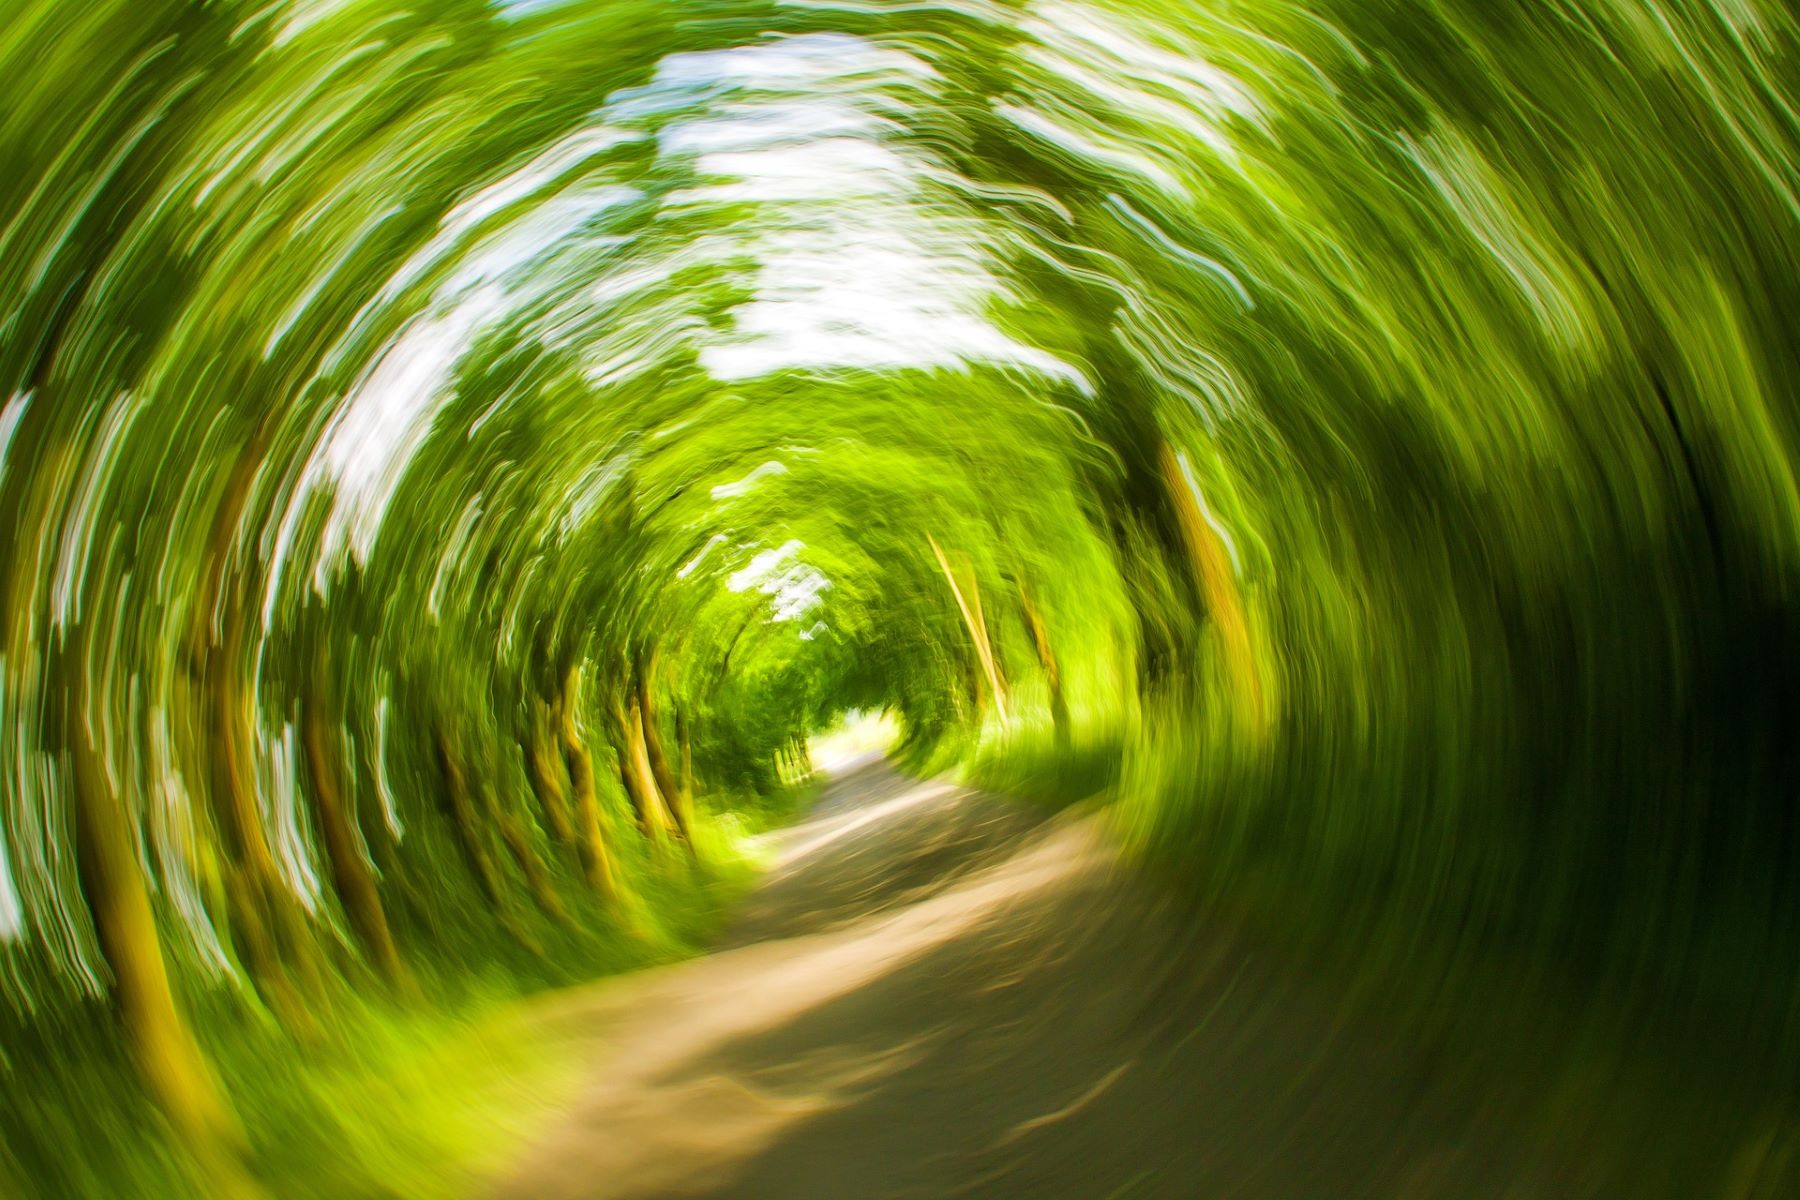 A blurry tunnel view of trees